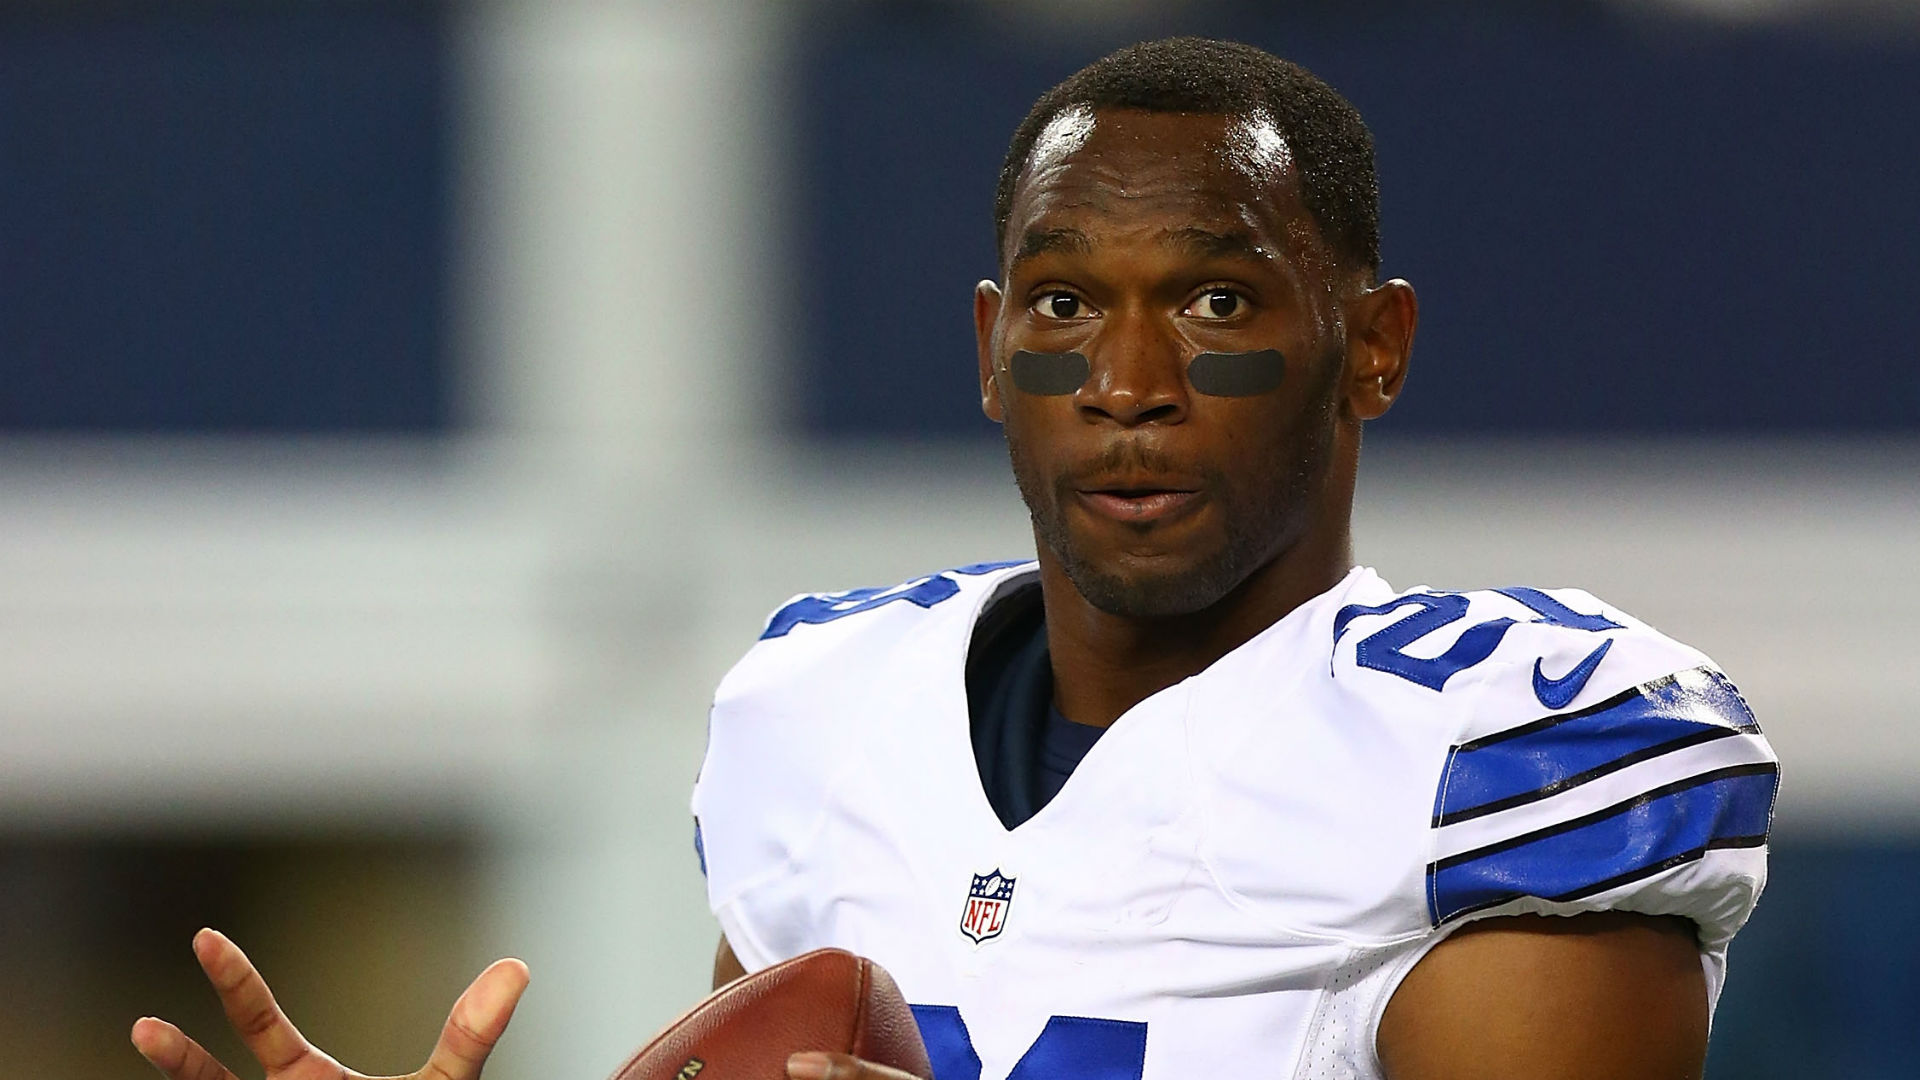 Former Cowboys RB Joseph Randle arrested, charged with rape